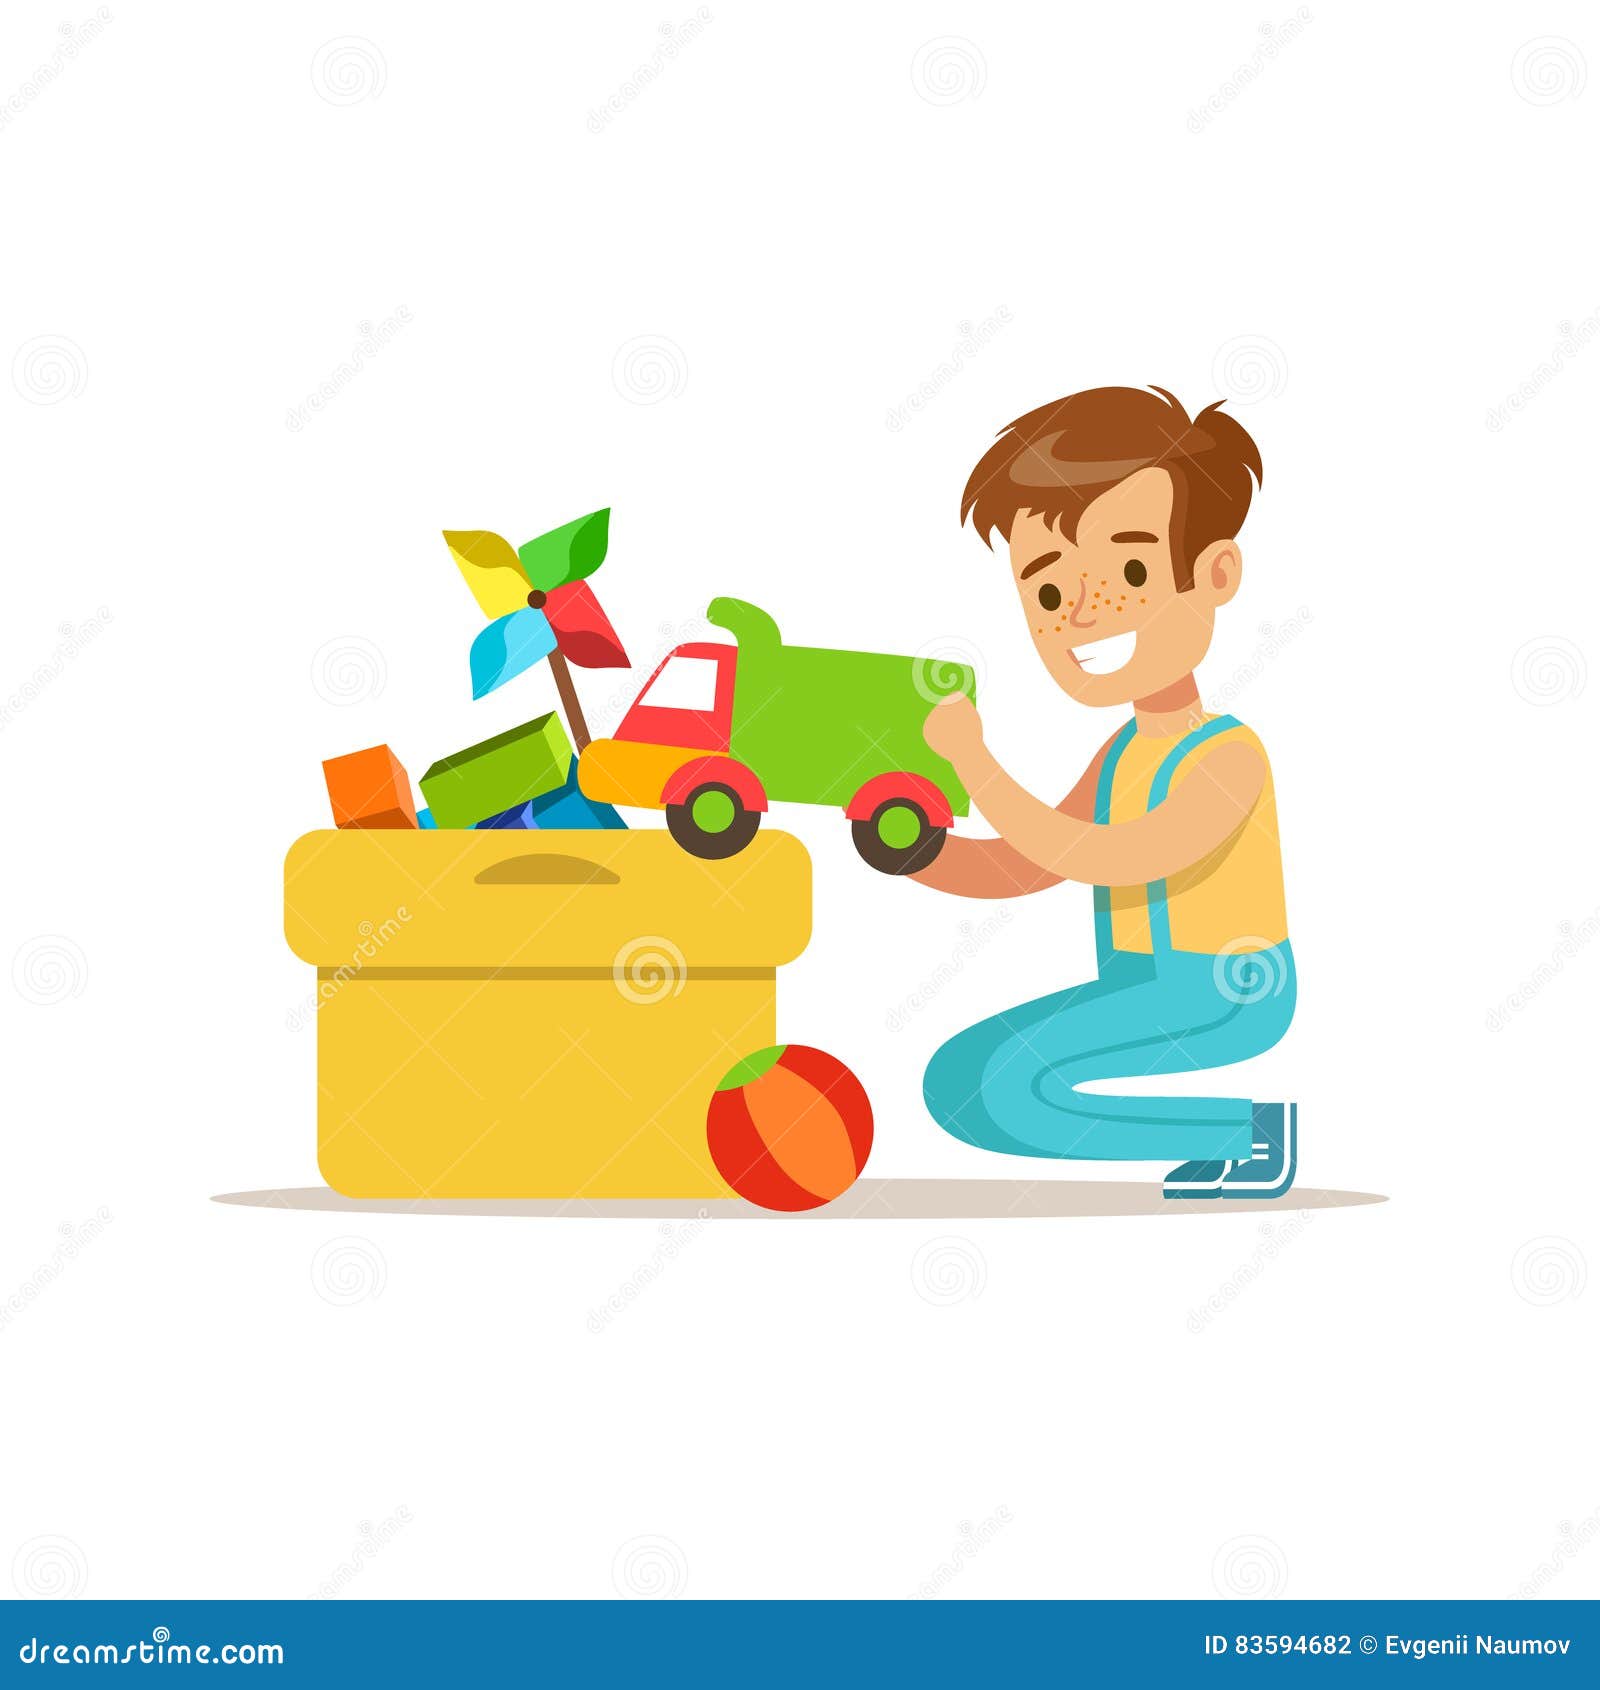 clipart picking up toys - photo #39